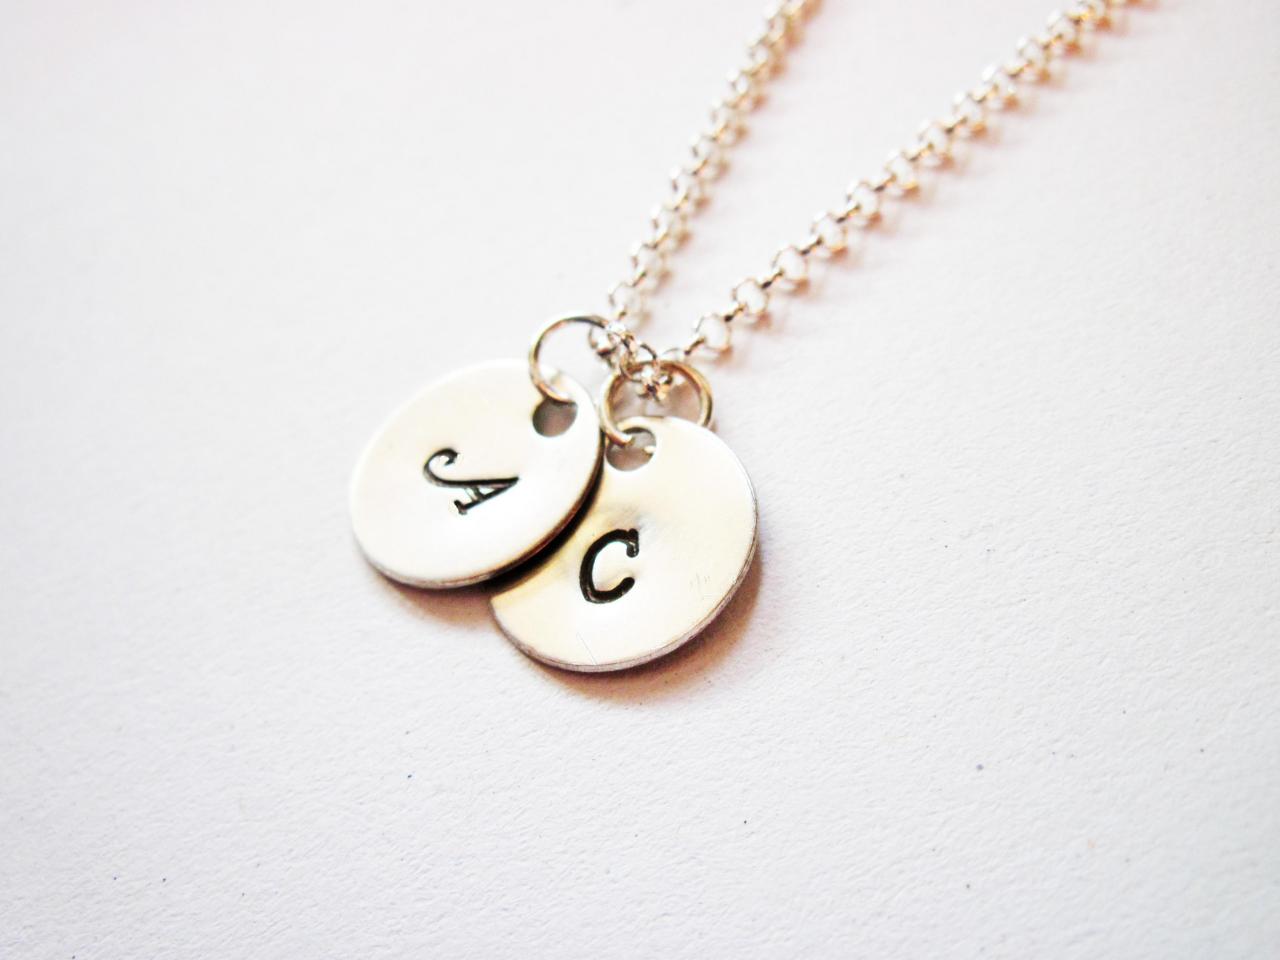 Two Initials Necklace, Two Discs Silver Necklace, Engraved Monogrammed Necklace, Personalized Necklace, Hand Stamped Necklace